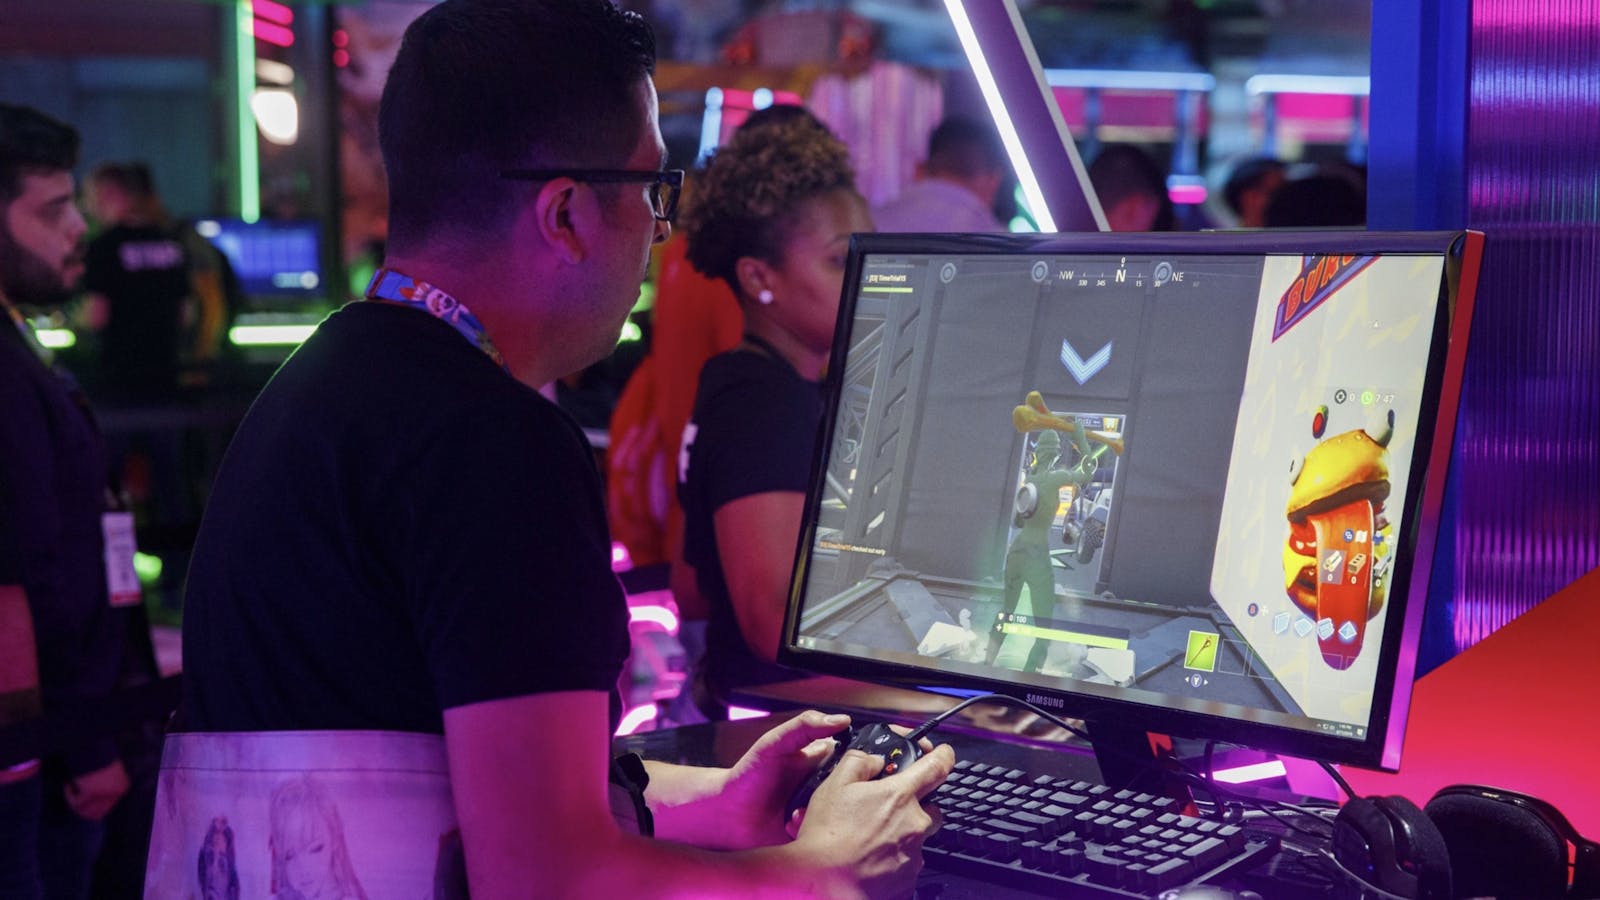 A Fortnite player at E3 in 2019. Photo by Bloomberg